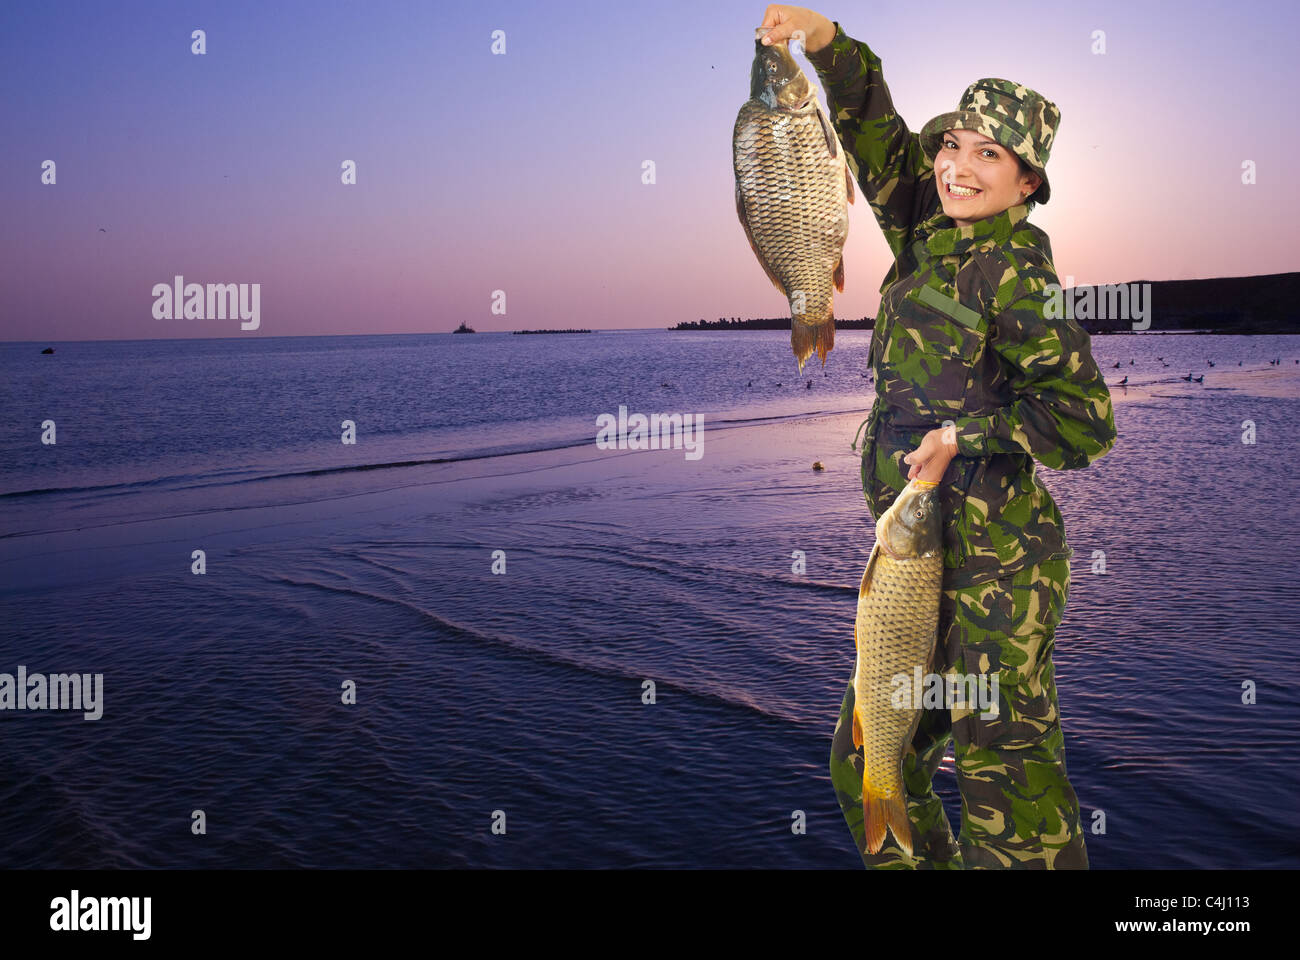 Happy fisherwoman at lake walking and holding two big carps in the morning at sunrise,copy space for text message Stock Photo